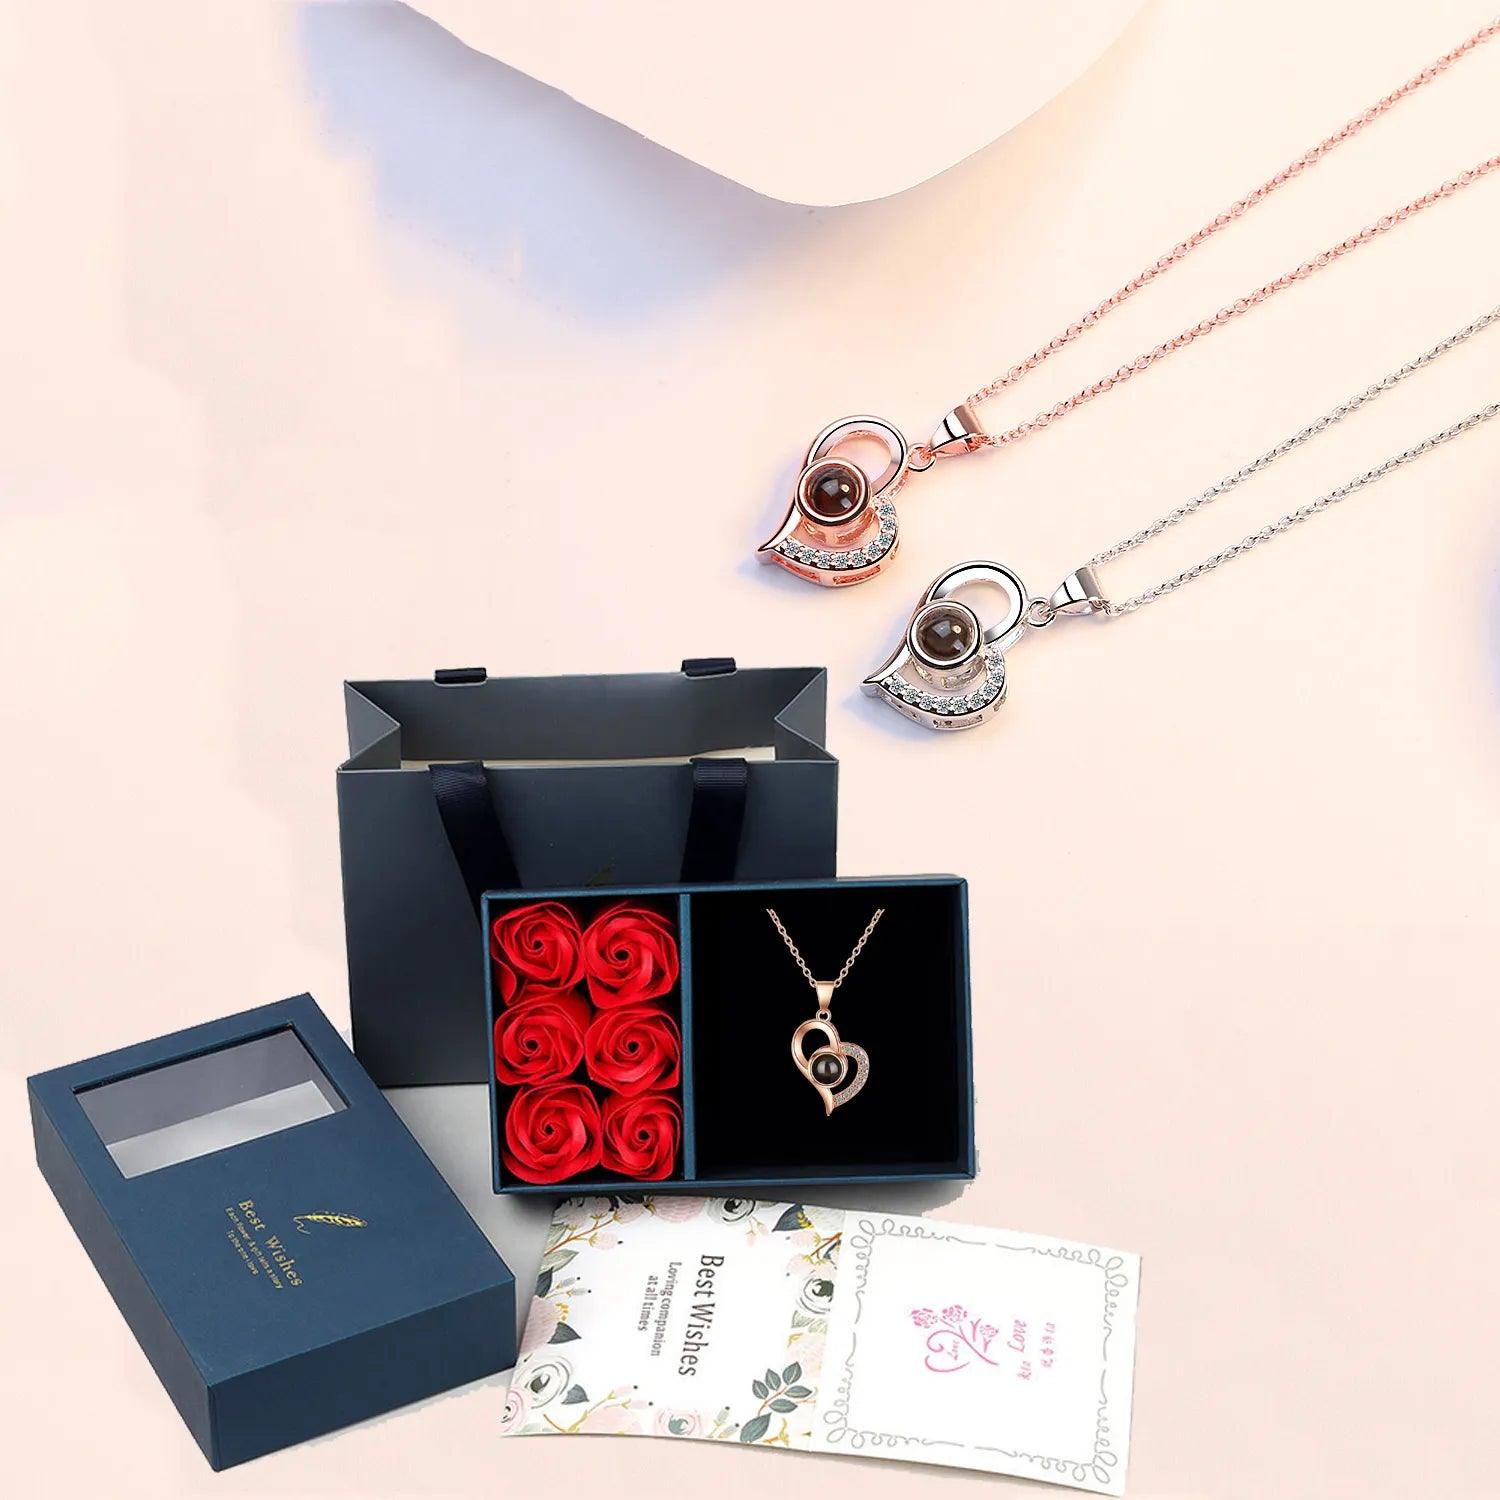 Enchanting Elegance: Necklace Gift Set in a luxury gift box along with Roses - Heart Crafted Gifts